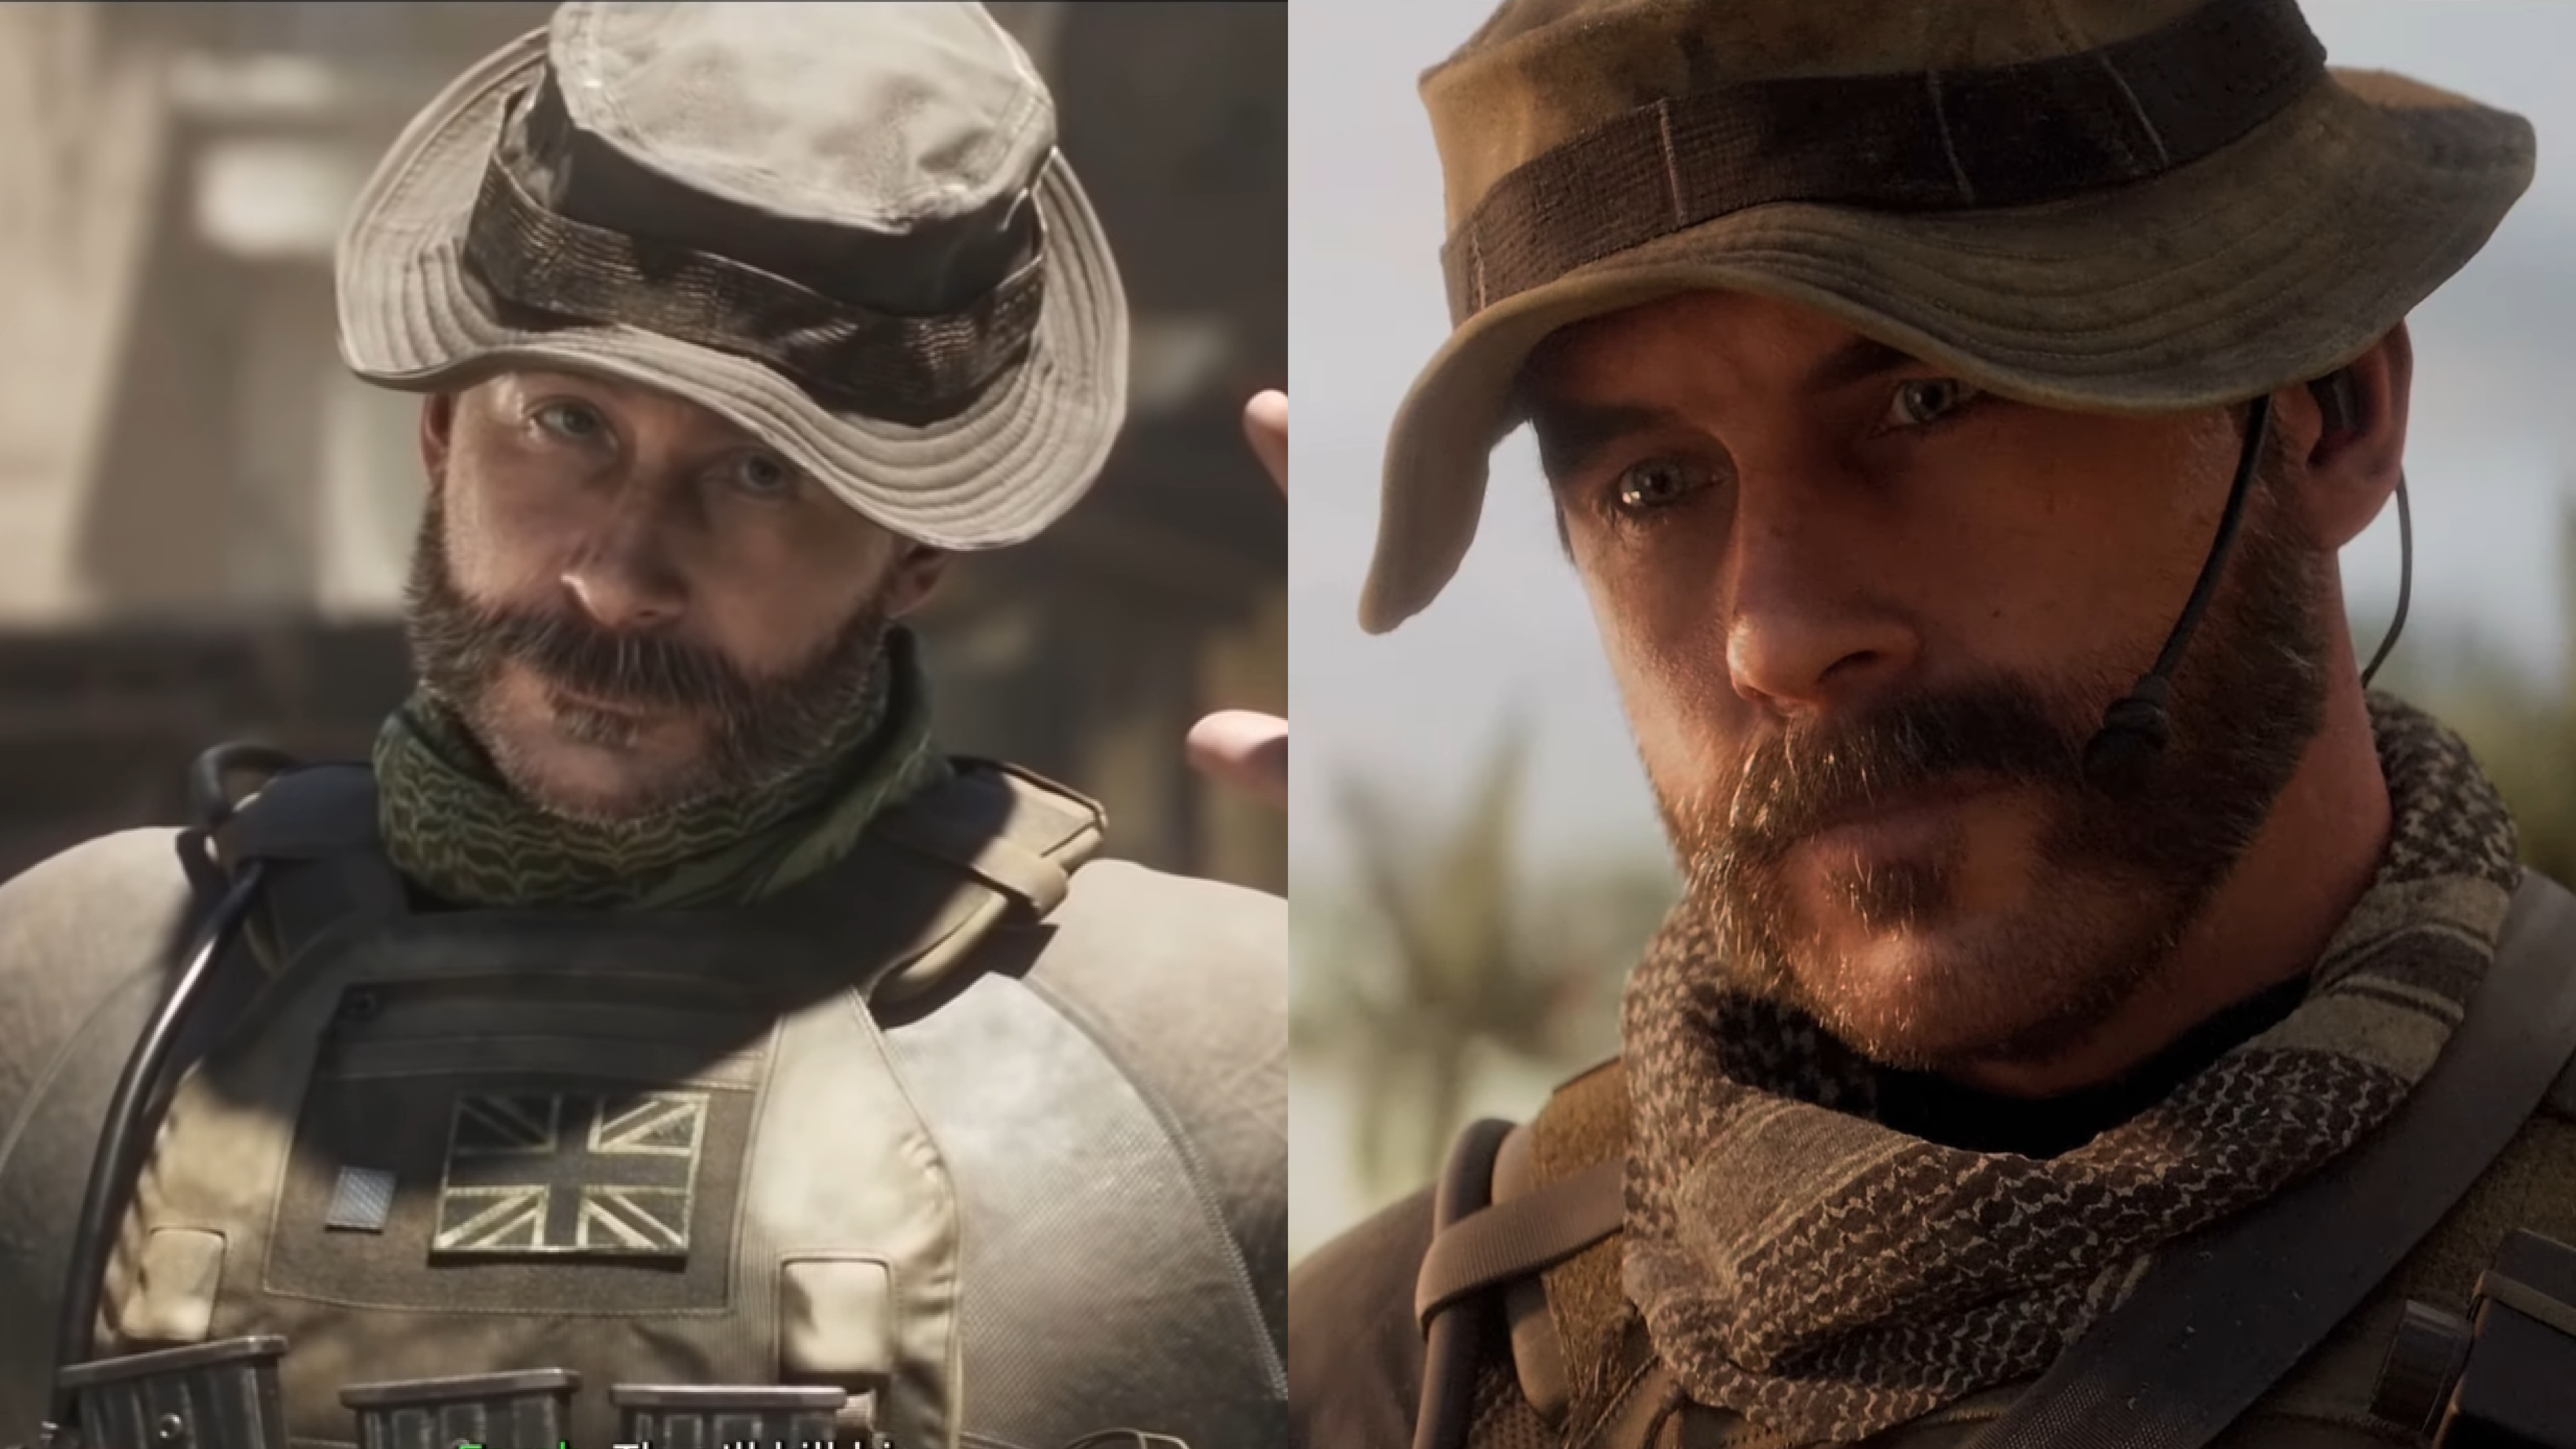 captain-price-face-model-mw2019-compare-to-mw2022-he-v0-njgzsiptmoqa1